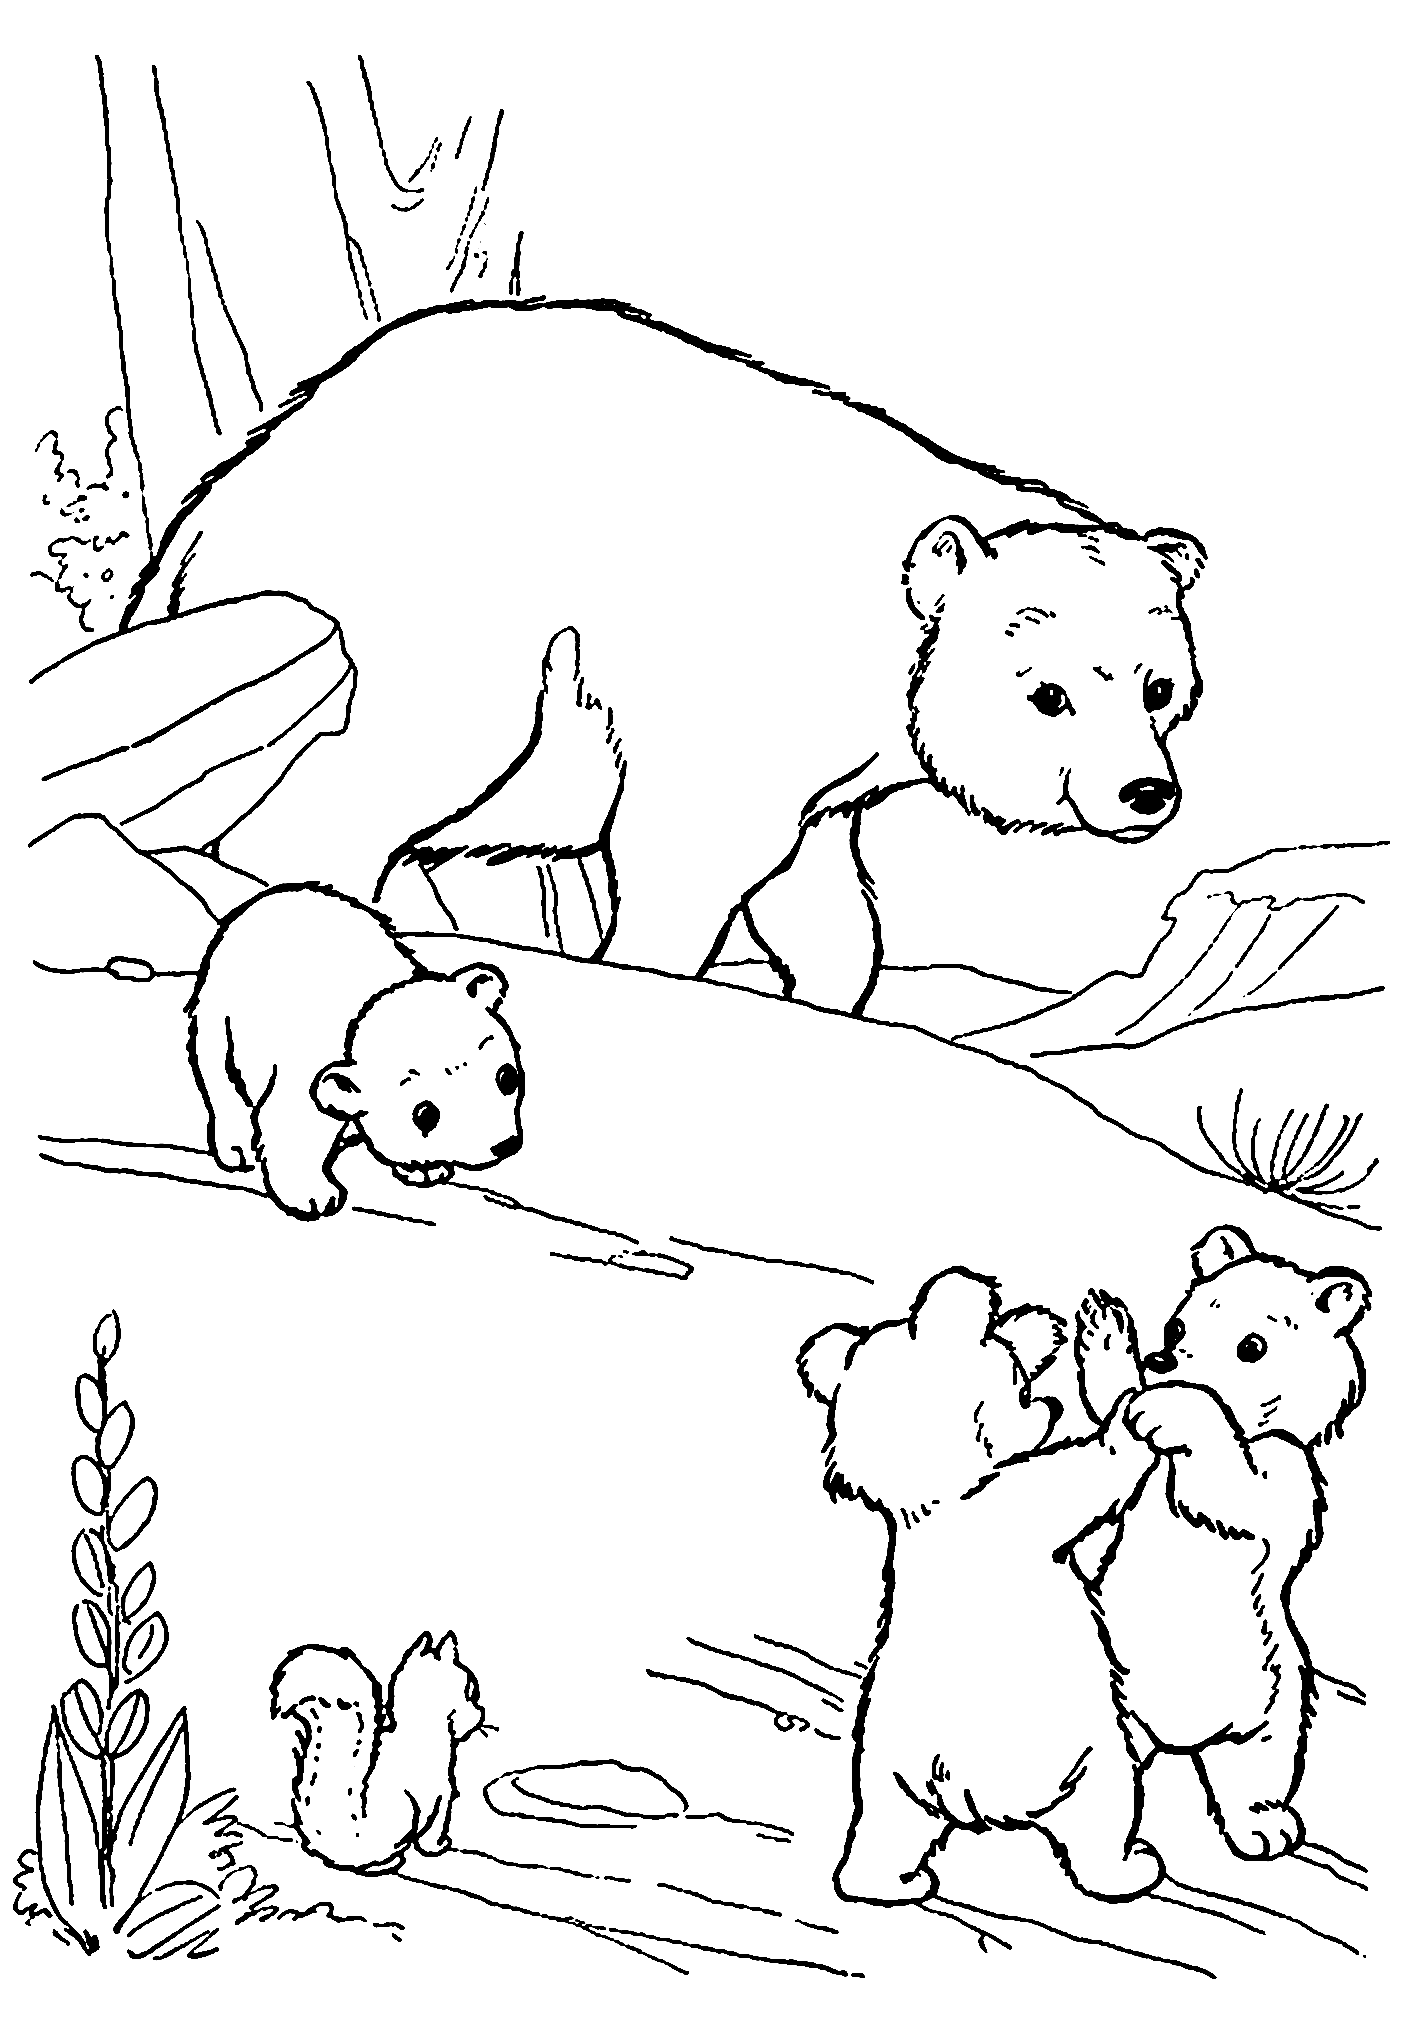 Printable Coloring Page of Mommy and Baby Bears